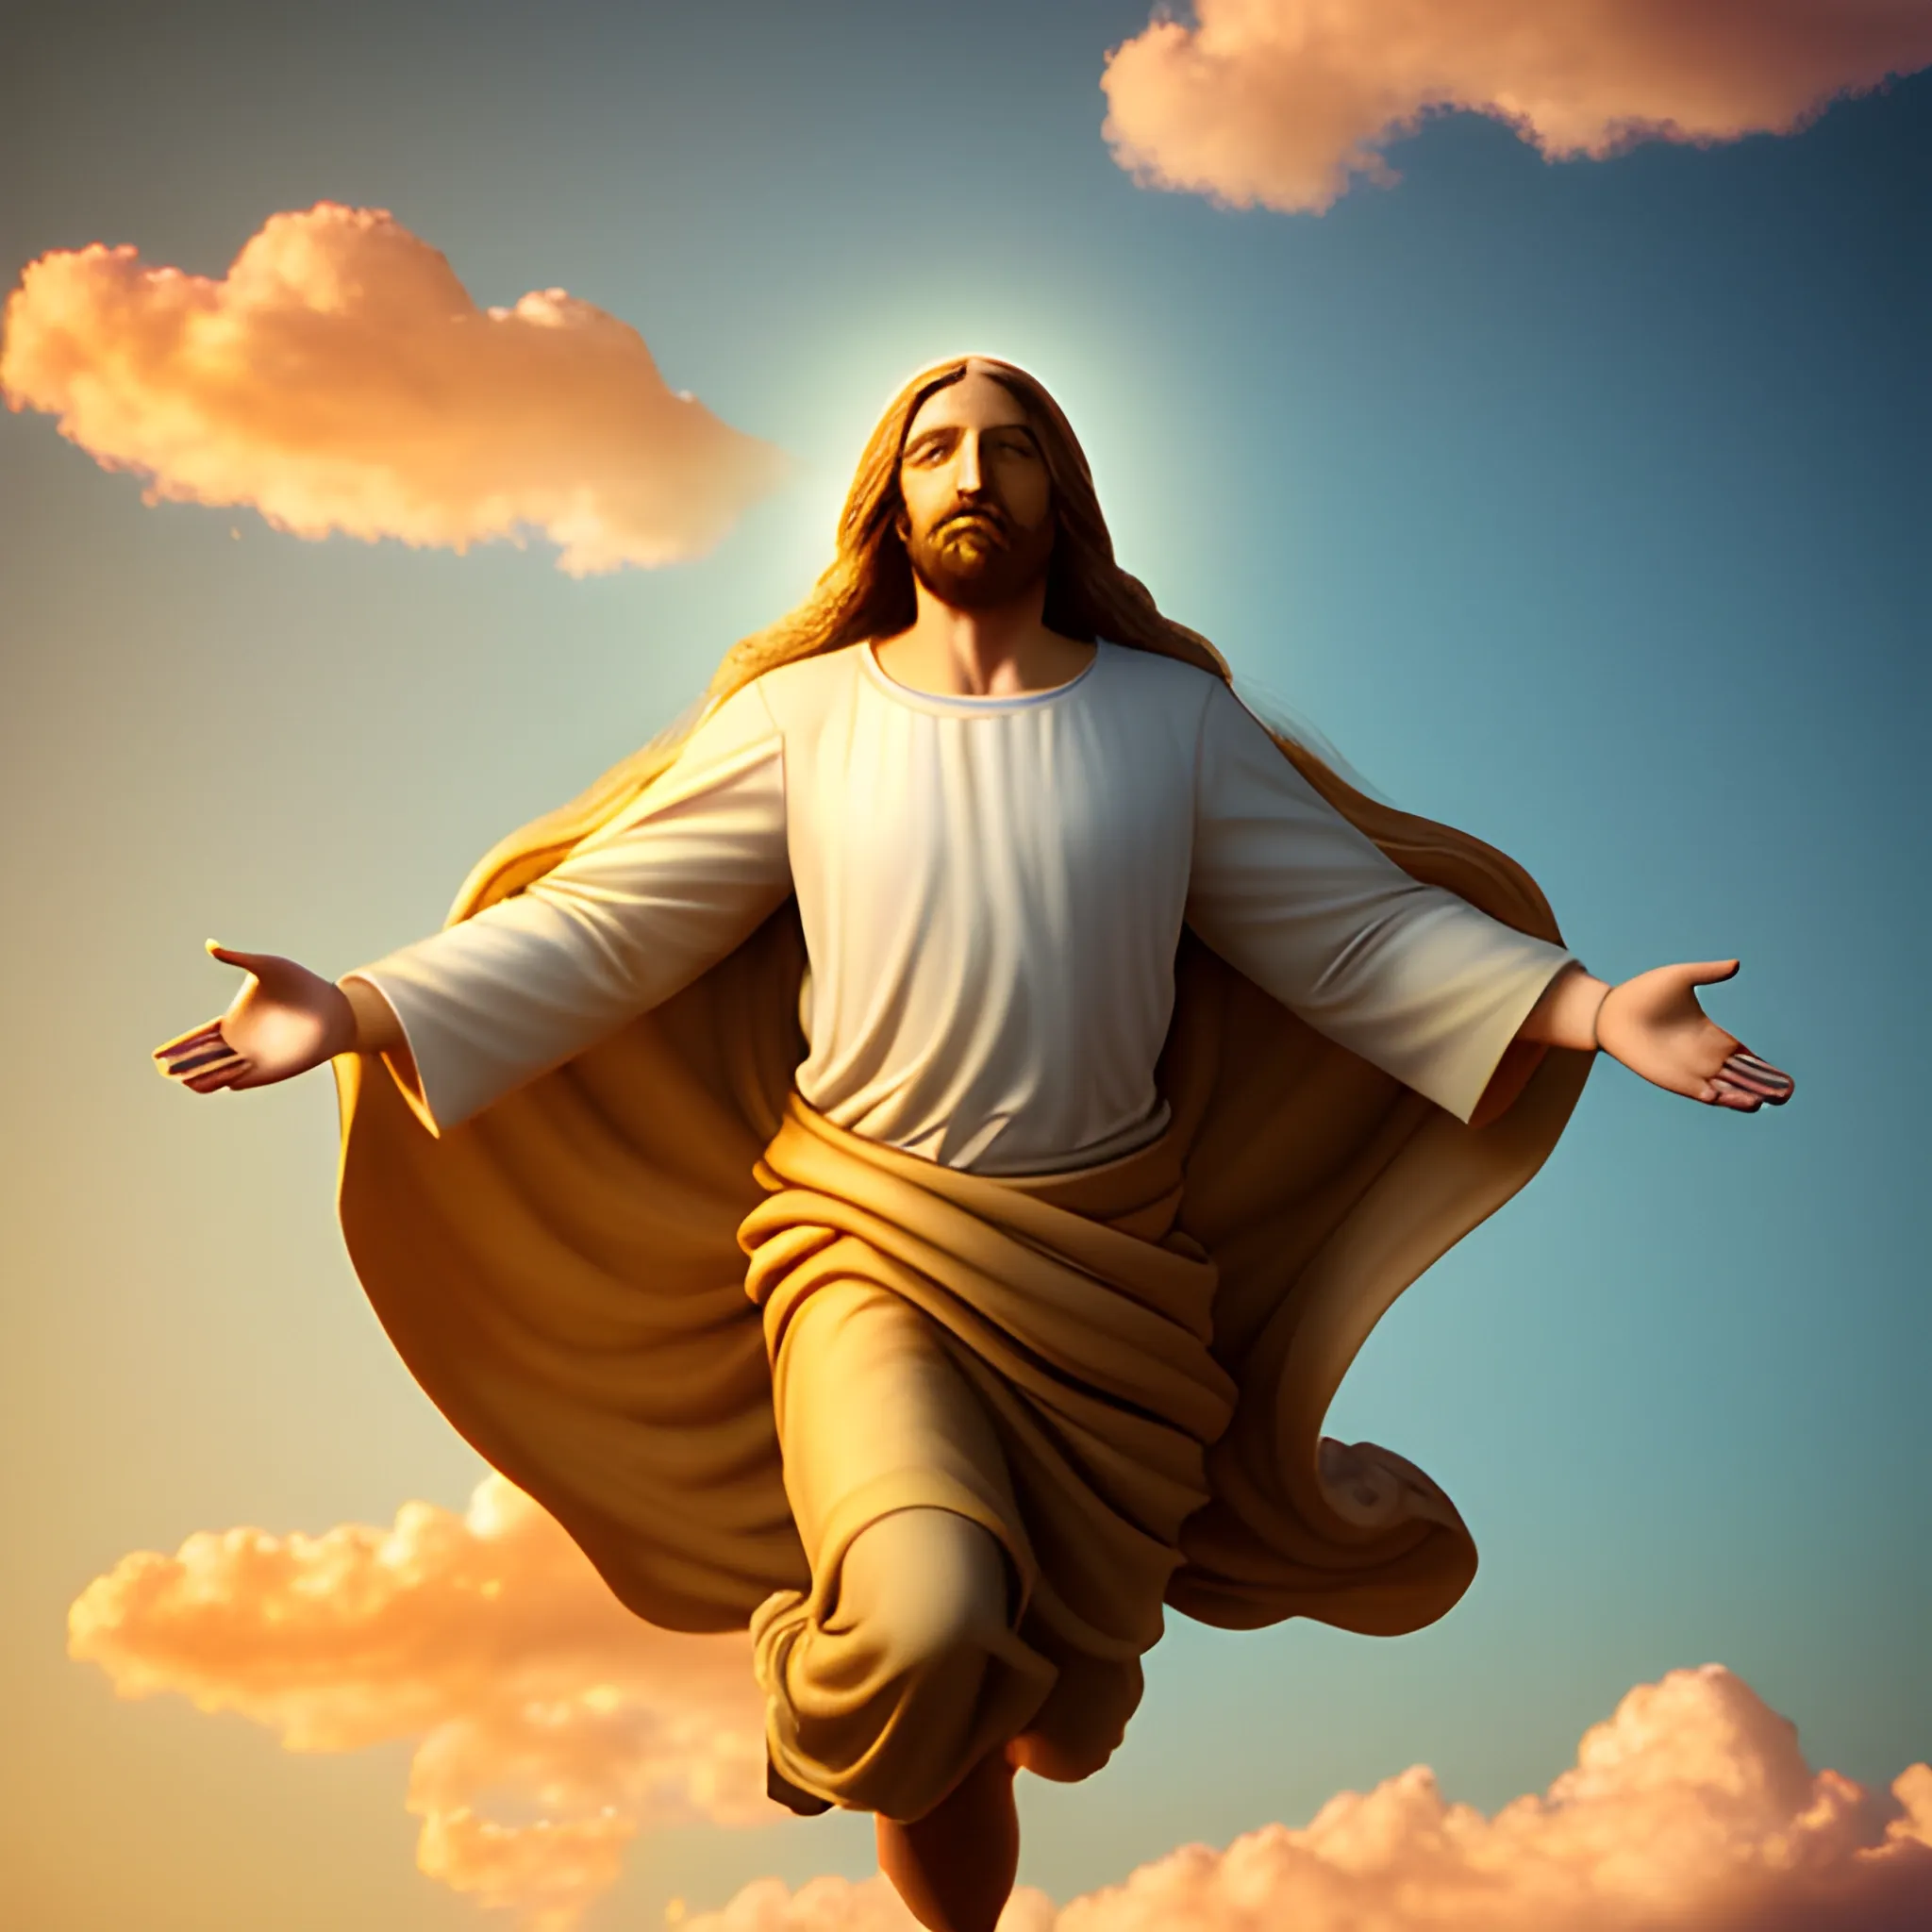 Jesus with brown skin and golden hair surrounded by light flying into the sky full of beautiful colors and hand of GOD reaching down from a cloud, 3D